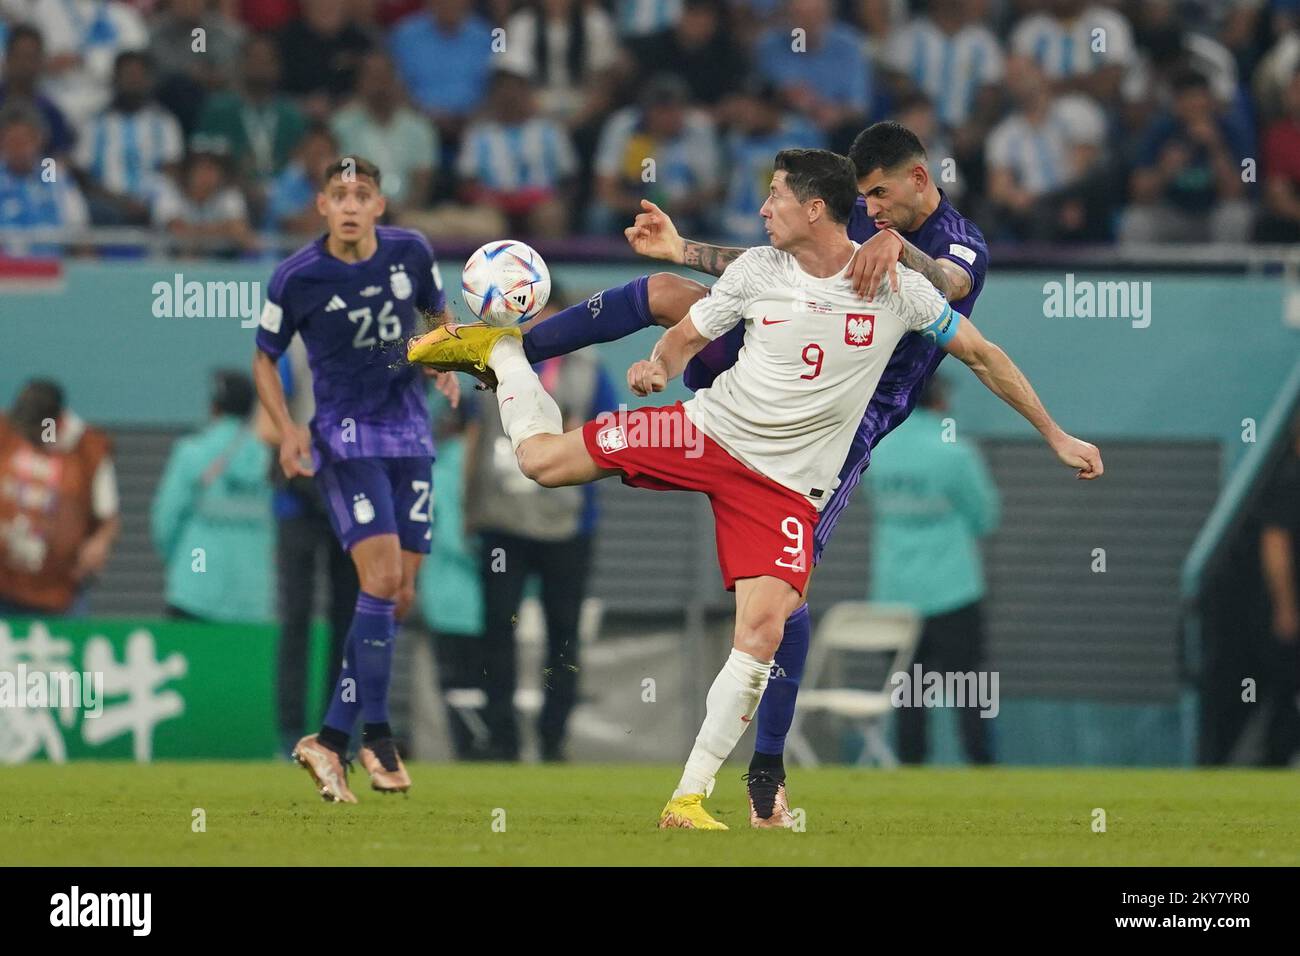 DOHA, QATAR - NOVEMBER 30: Player of Poland Robert Lewandowski during the FIFA World Cup Qatar 2022 group C match between Argentina and Poland at Stadium 974 on November 30, 2022 in Doha, Qatar. (Photo by Florencia Tan Jun/PxImages) Credit: Px Images/Alamy Live News Stock Photo